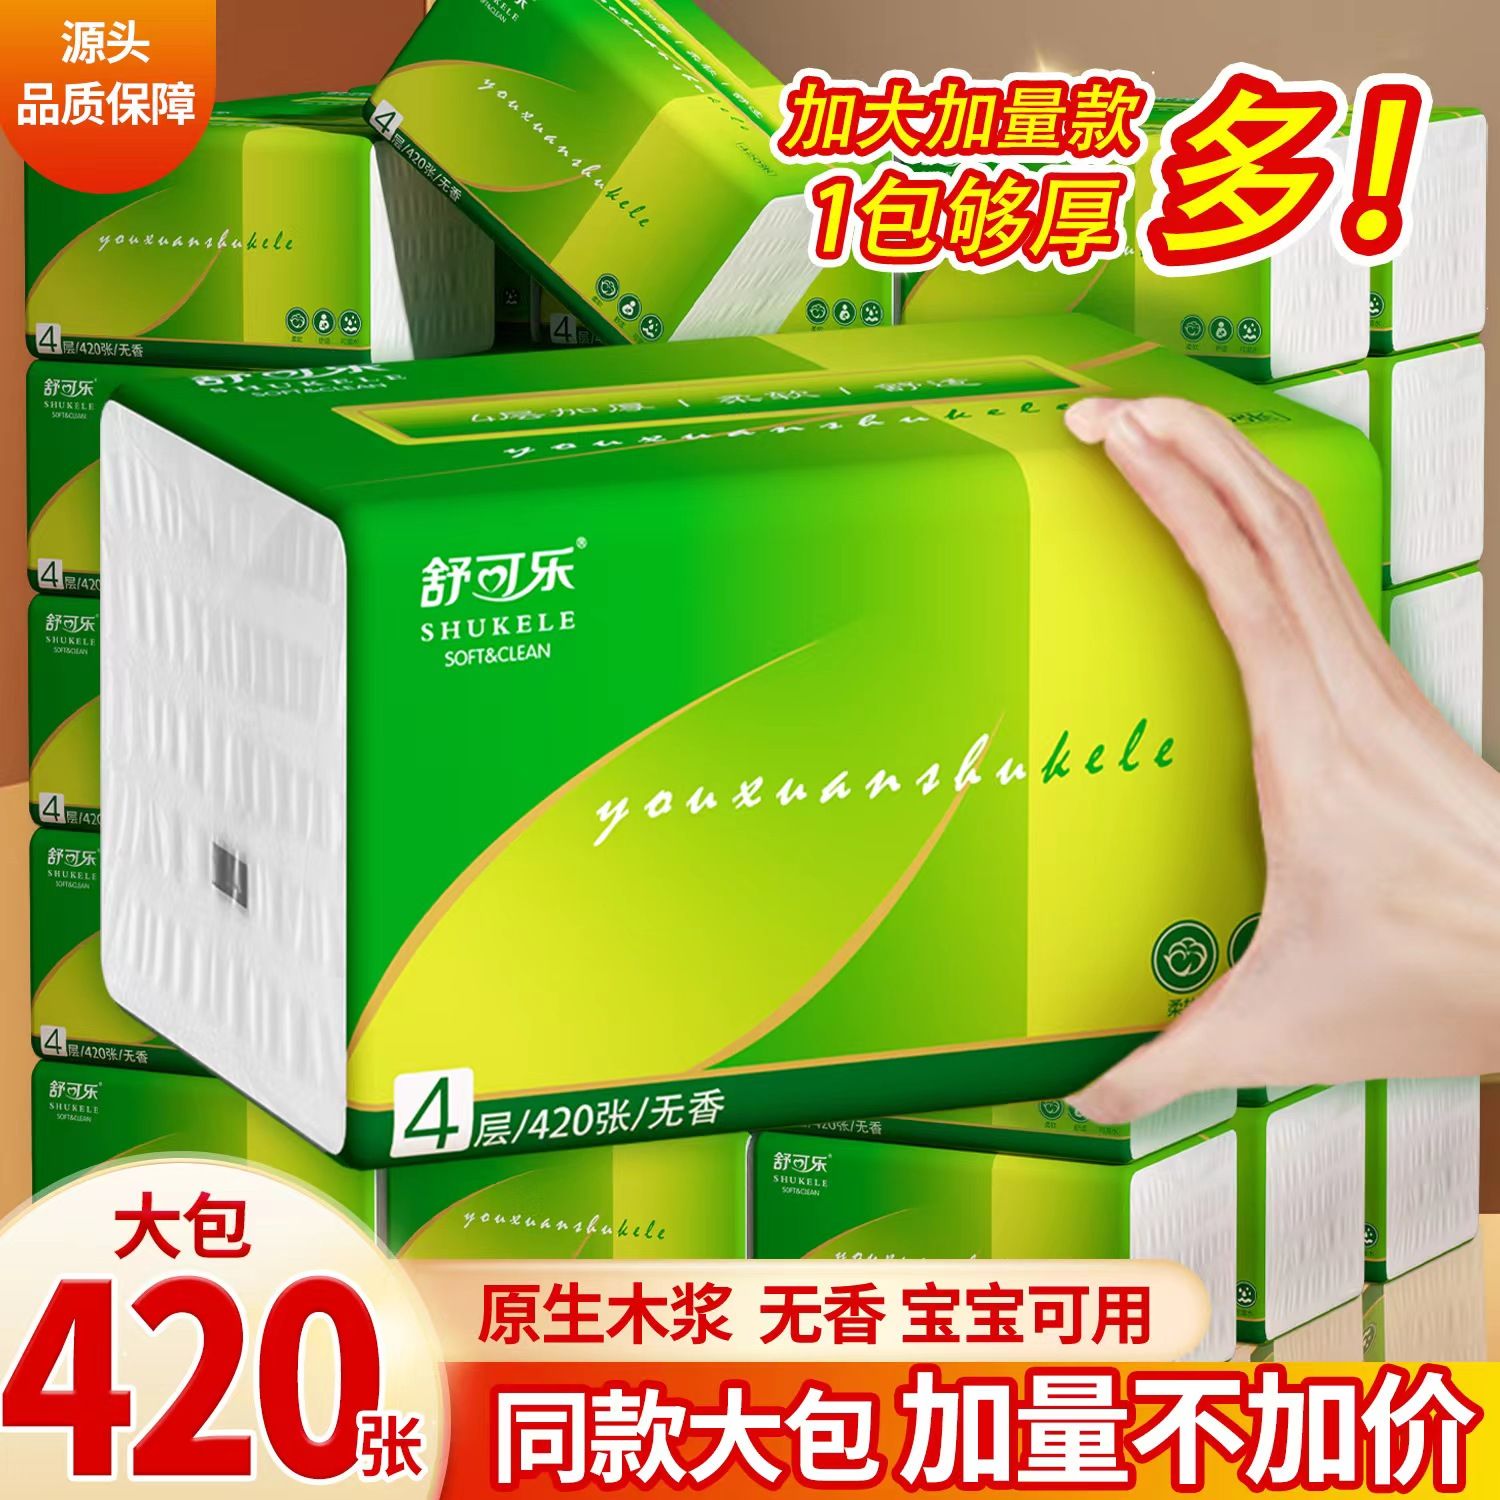 420 extra large size paper extraction napkin large size hand paper home use and commercial use toilet paper shukola full box